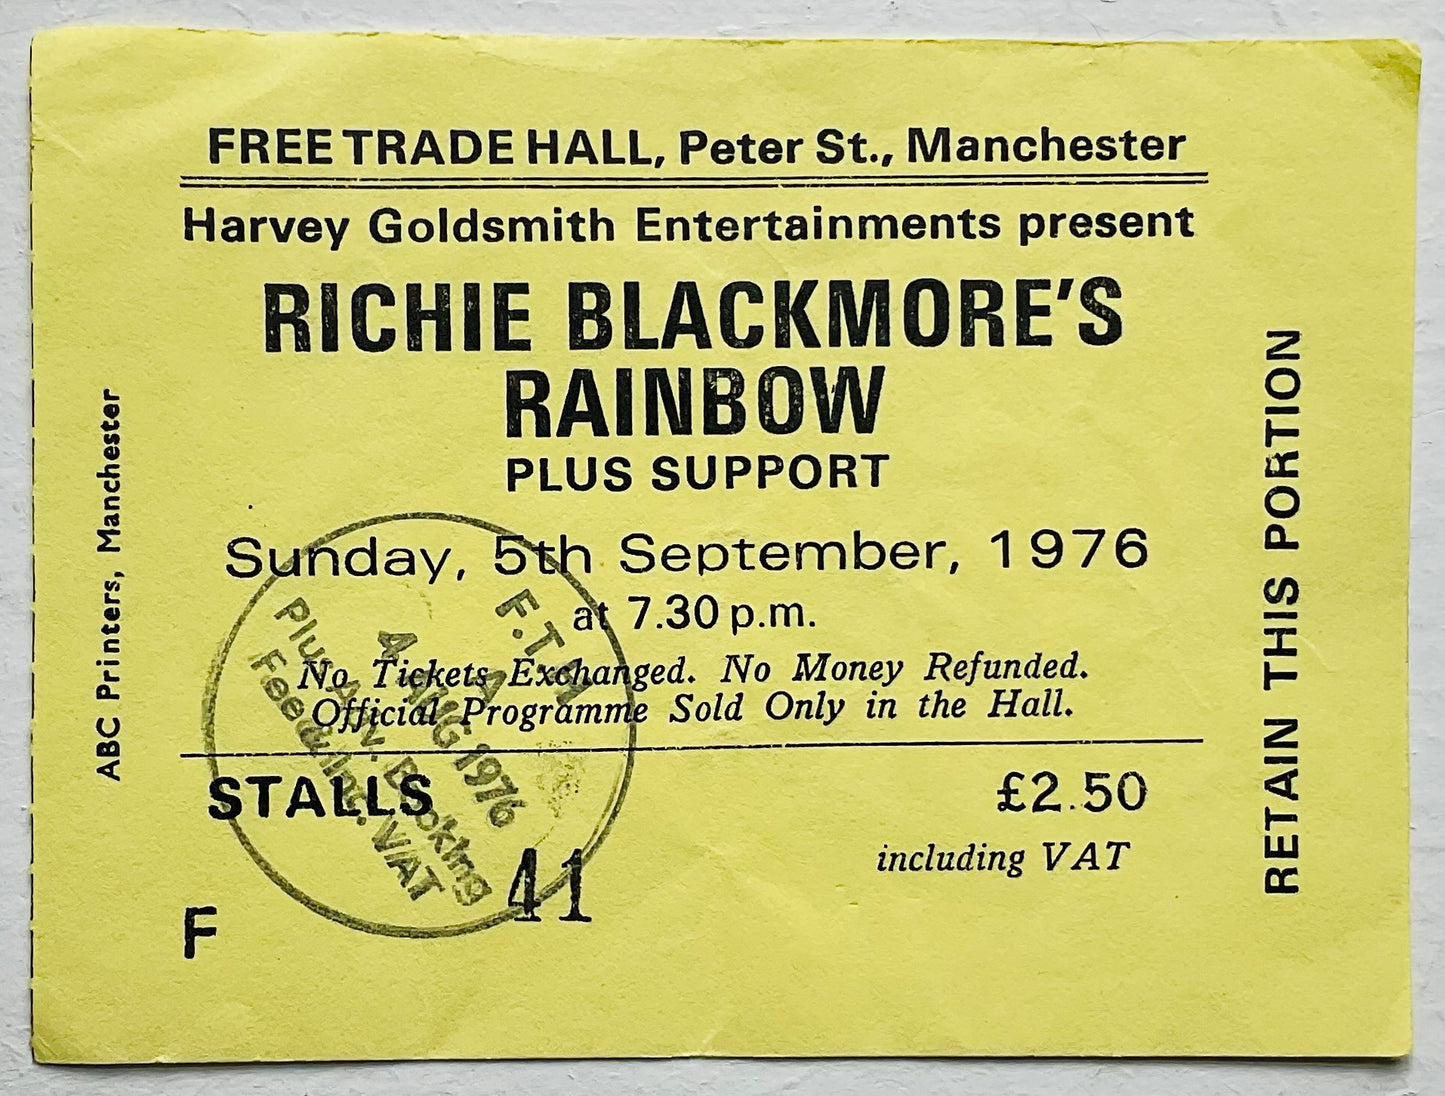 Rainbow Ritchie Blackmore Original Used Concert Ticket Free Trade Hall Manchester 5th Sept 1976